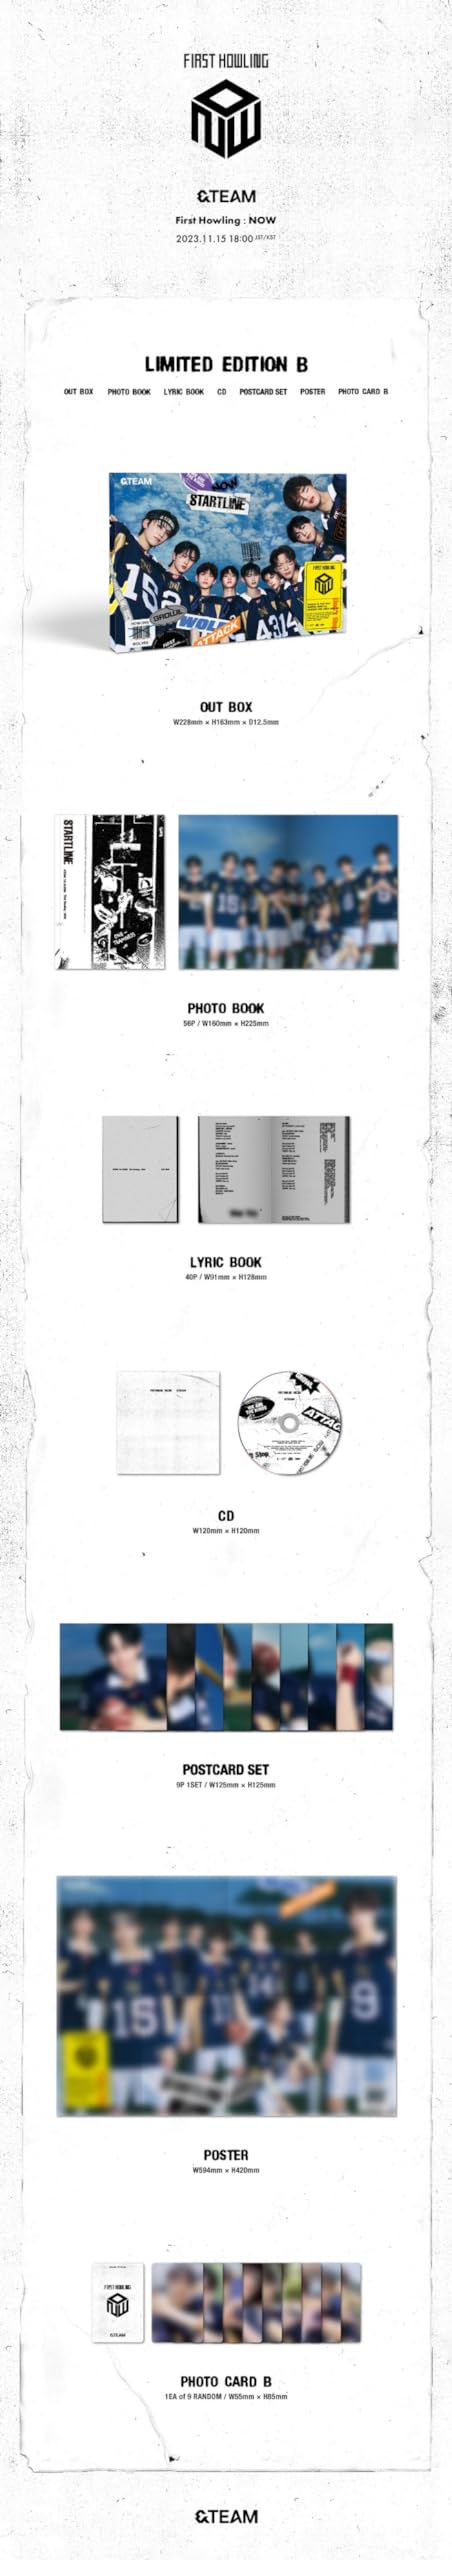 [CD] First Howling: NOW Type B w/PHOTOBOOK+PHOTOCARD B First Edition POCS-39045_2